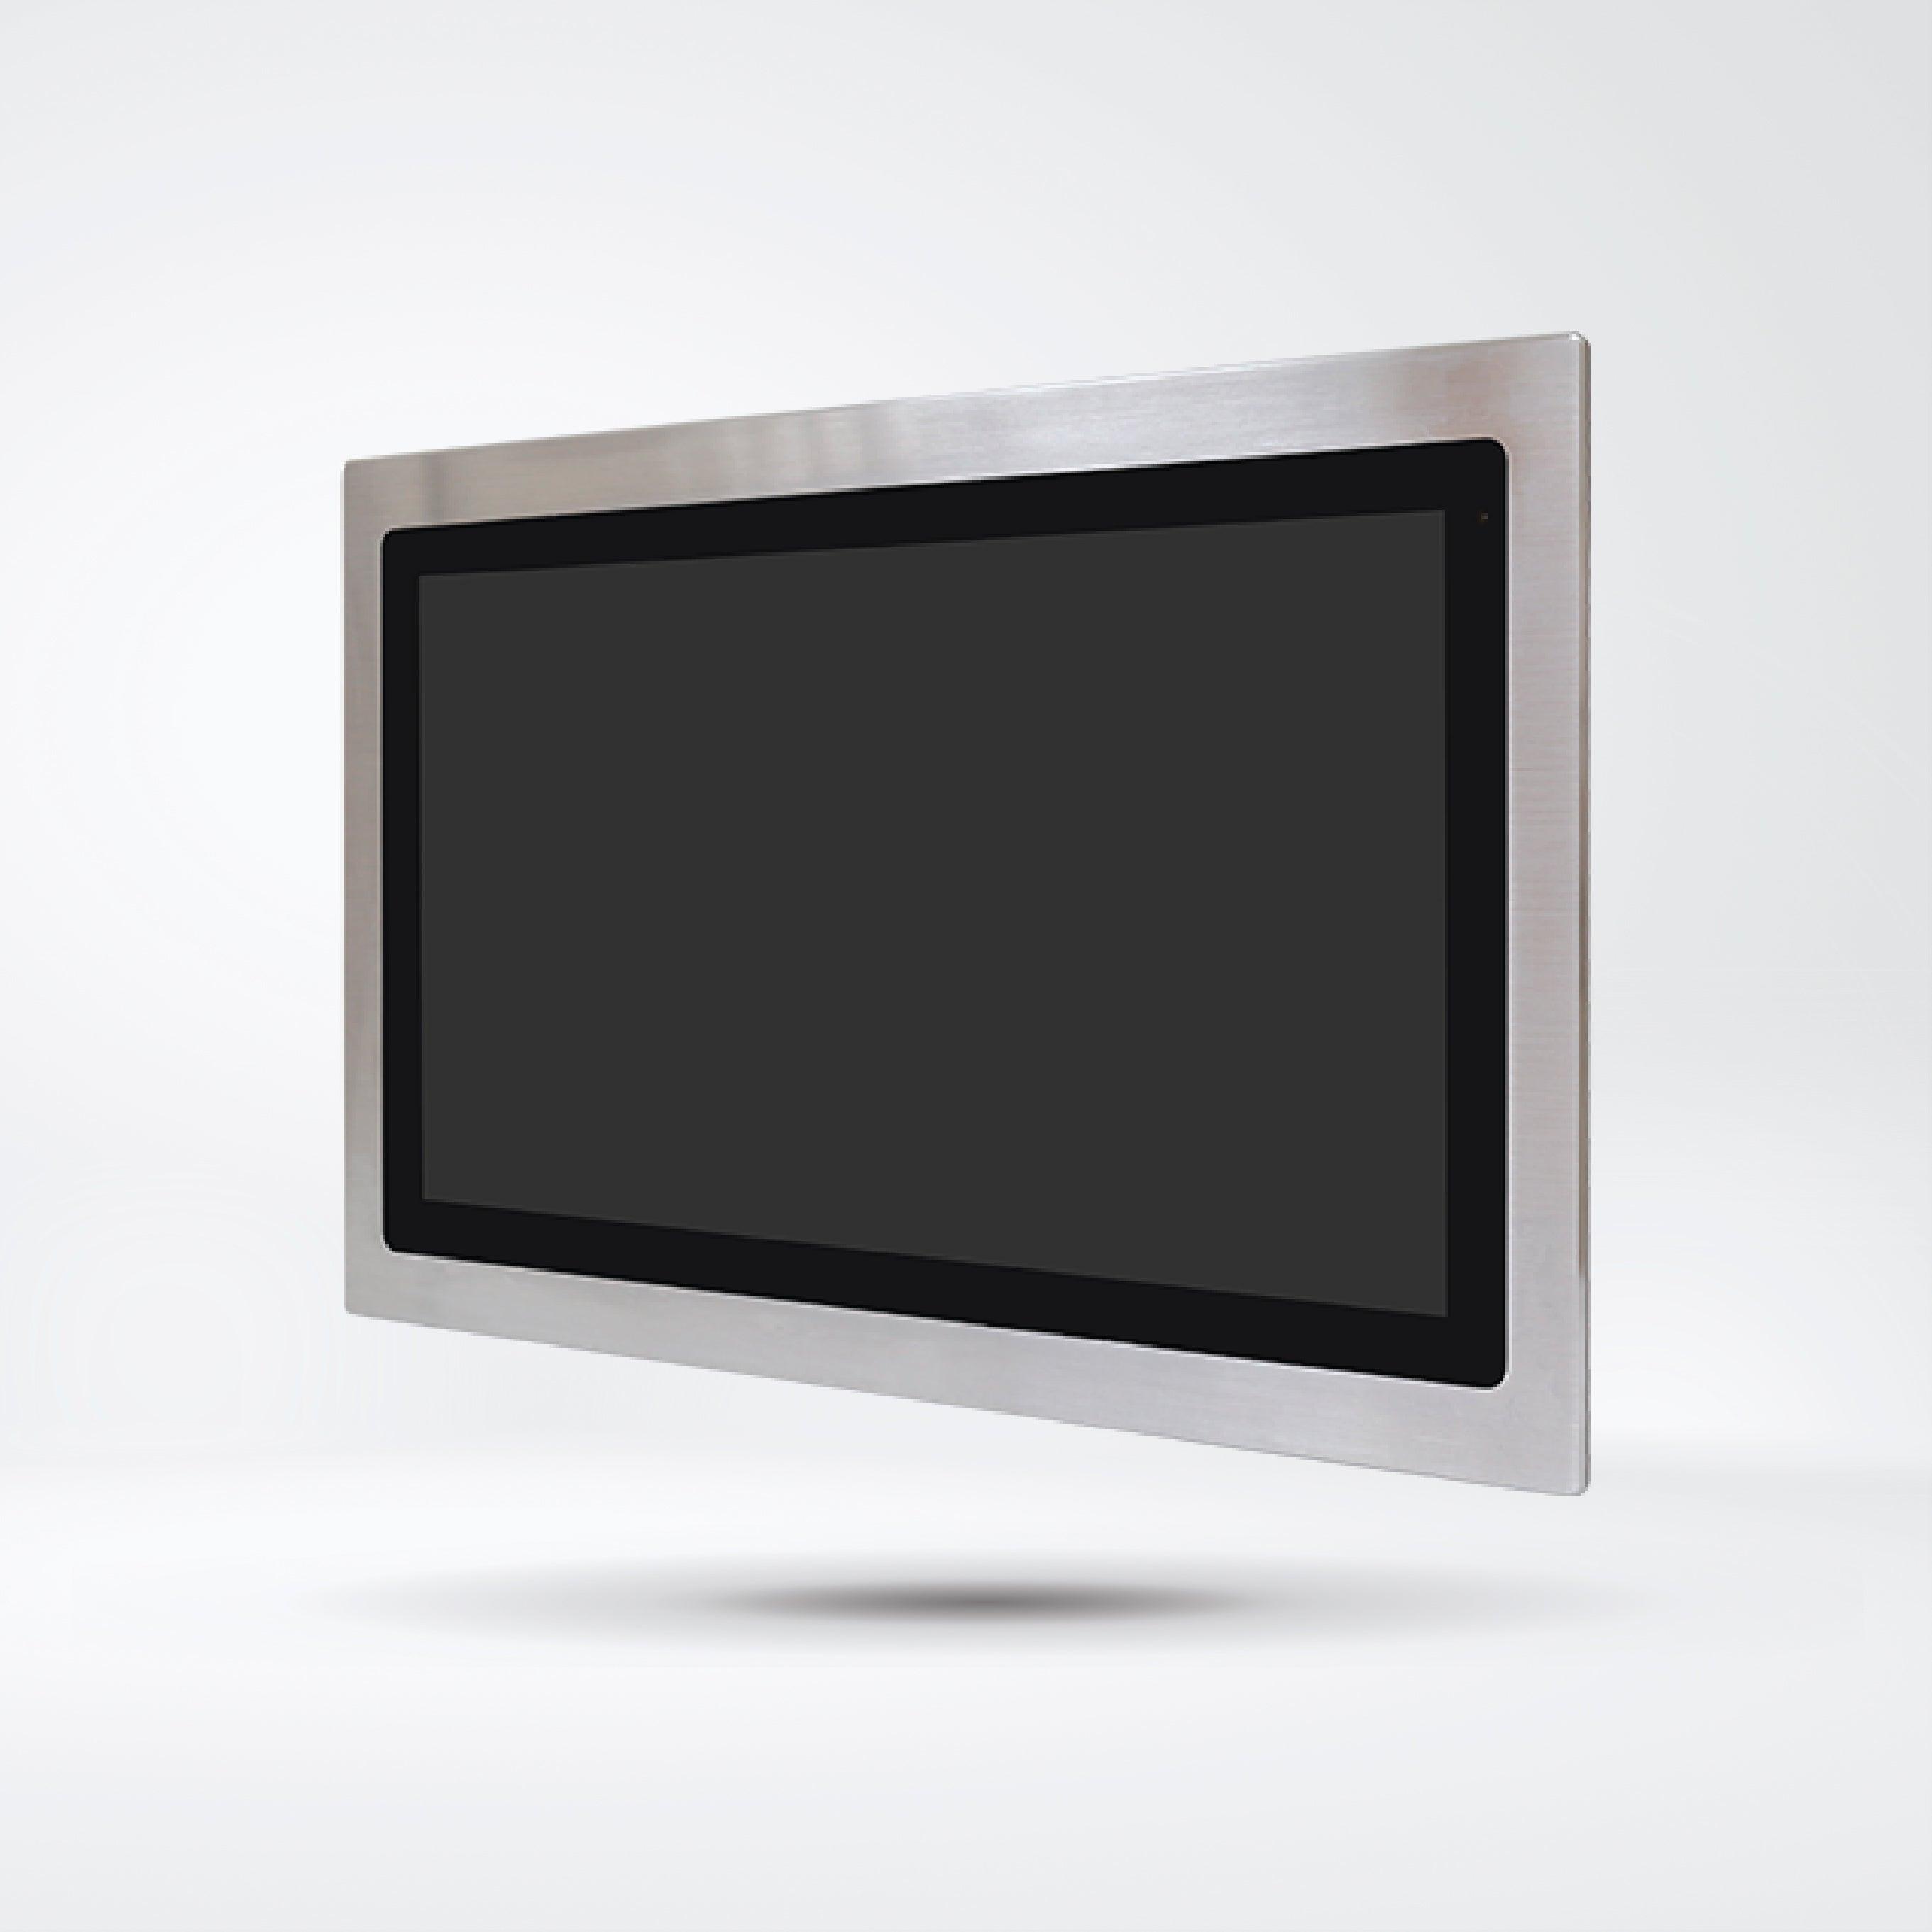 FABS-121P 21.5” Flat Front Panel IP66 Stainless Chassis Display - Riverplus